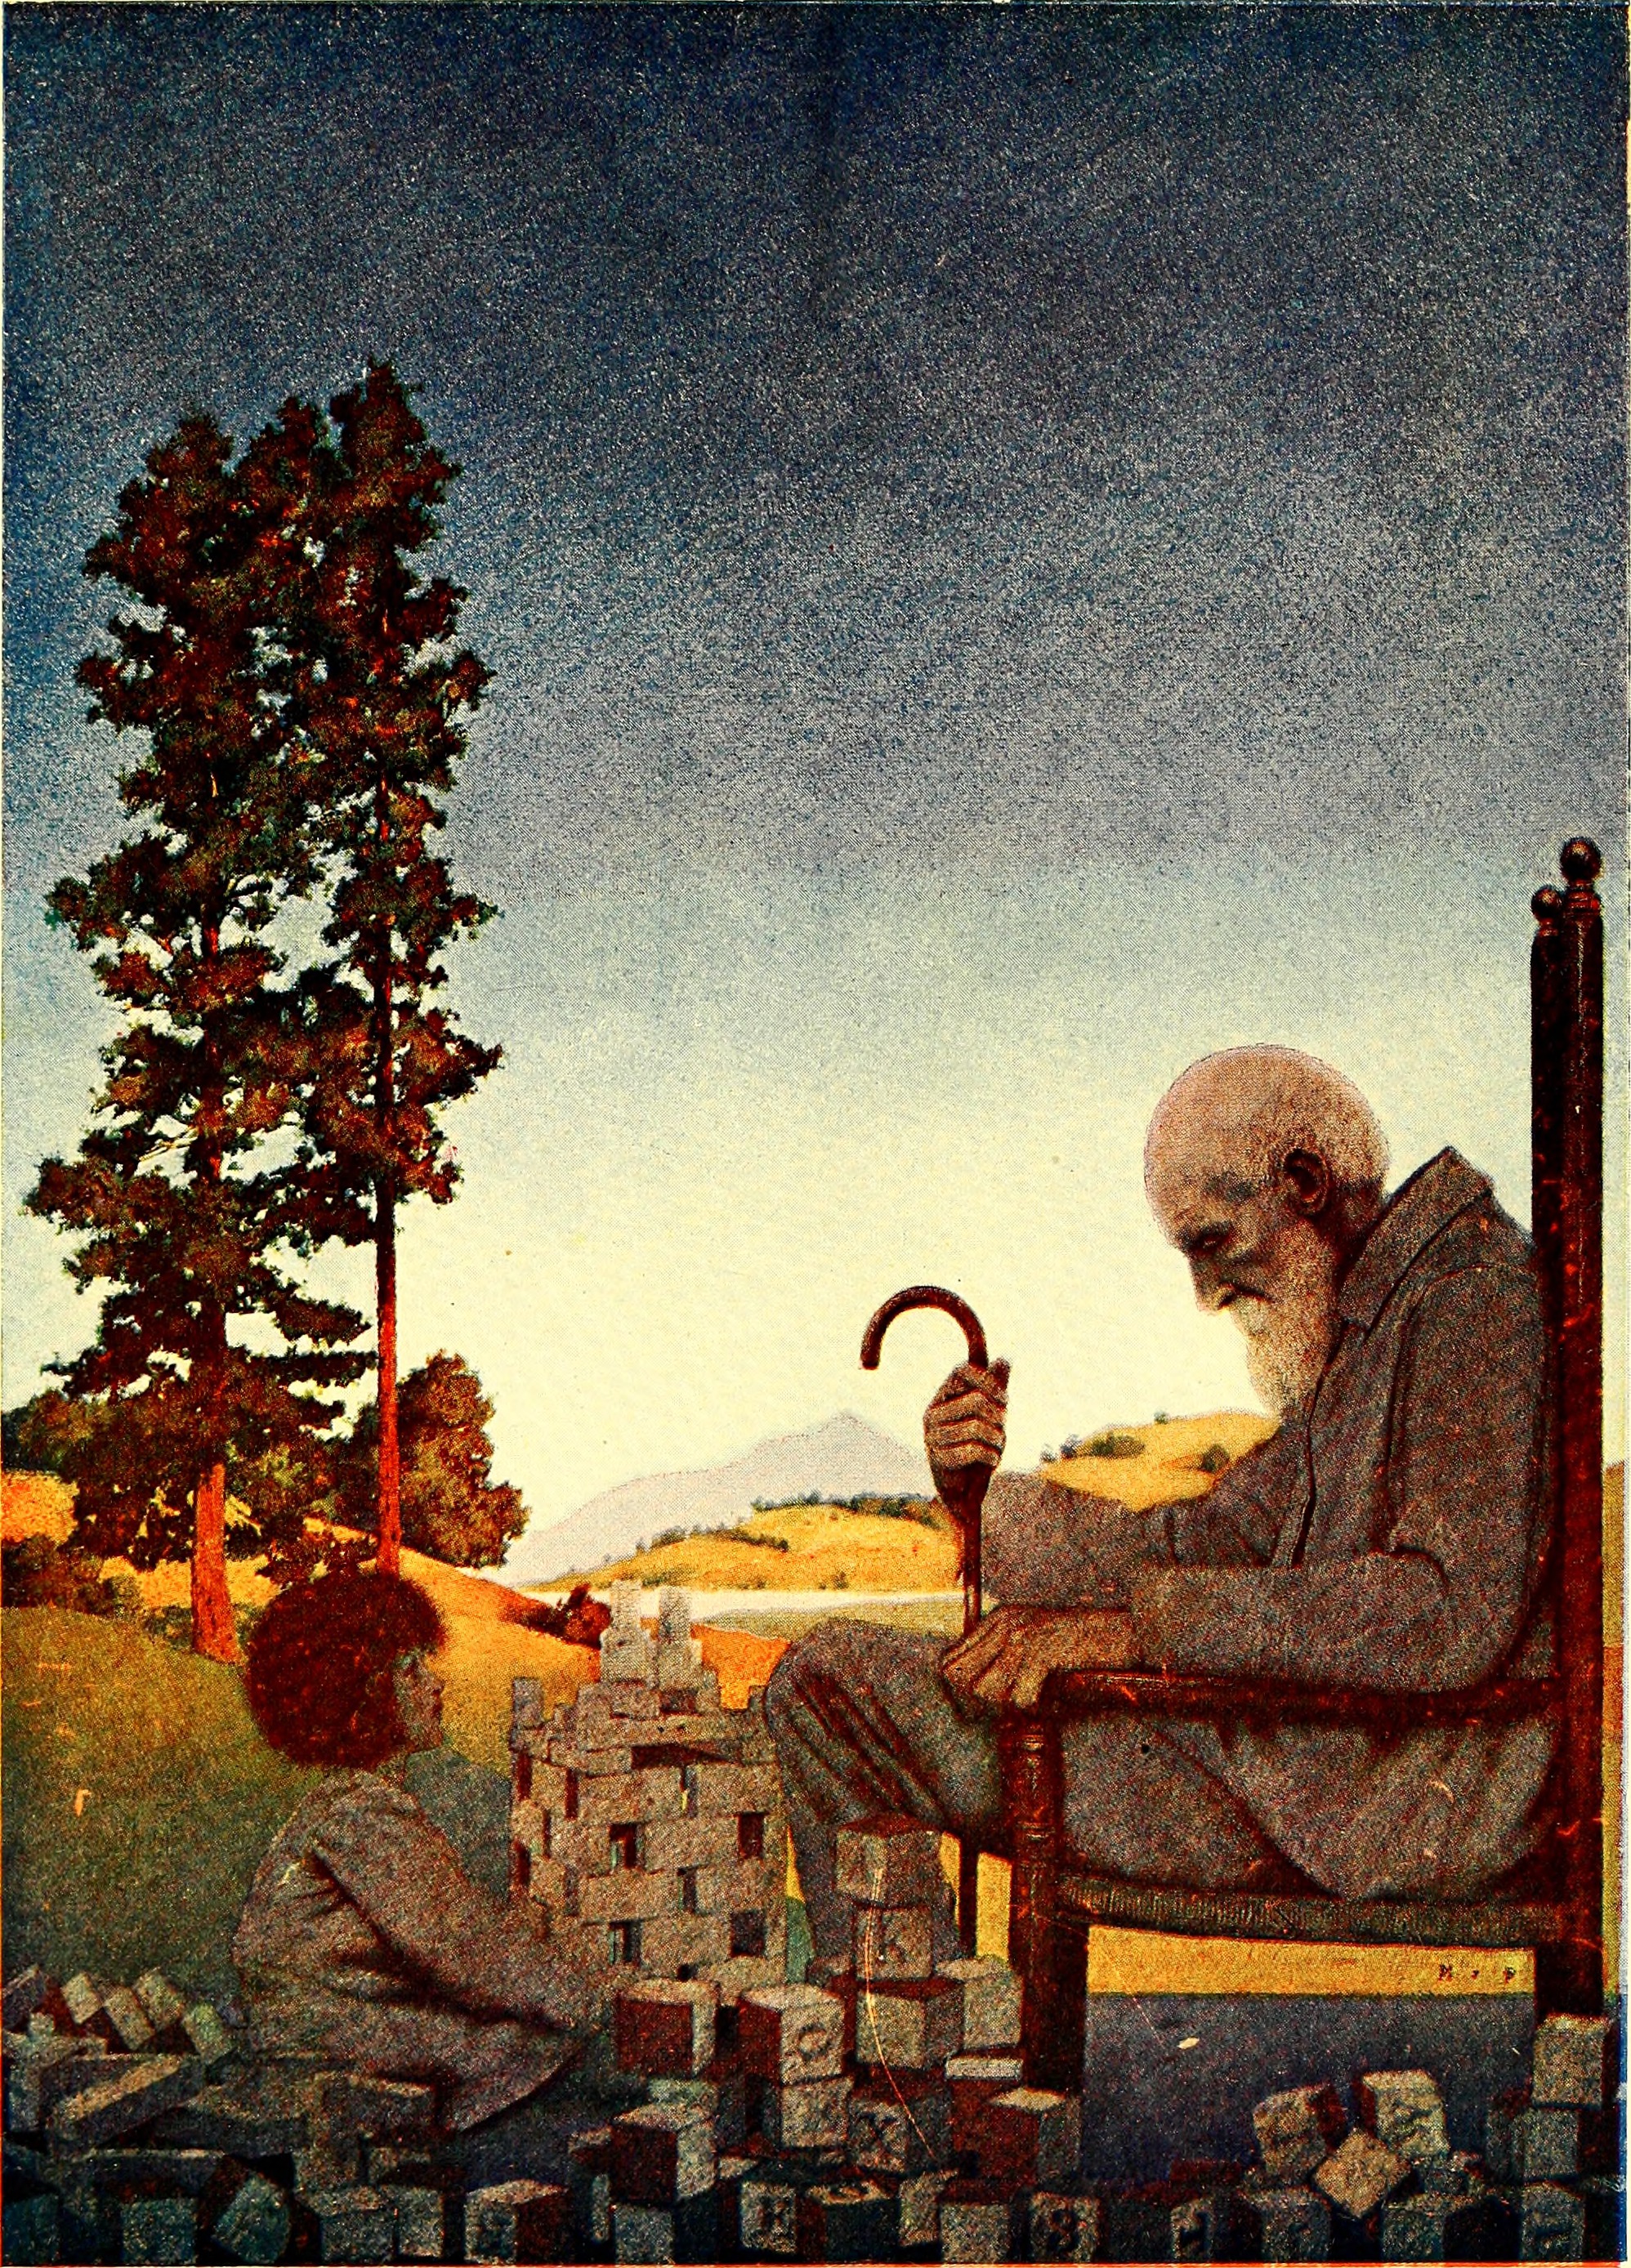 Illustrations from Poems of Childhood (1904) by Eugene Field with illustrations by Maxfield Parrish